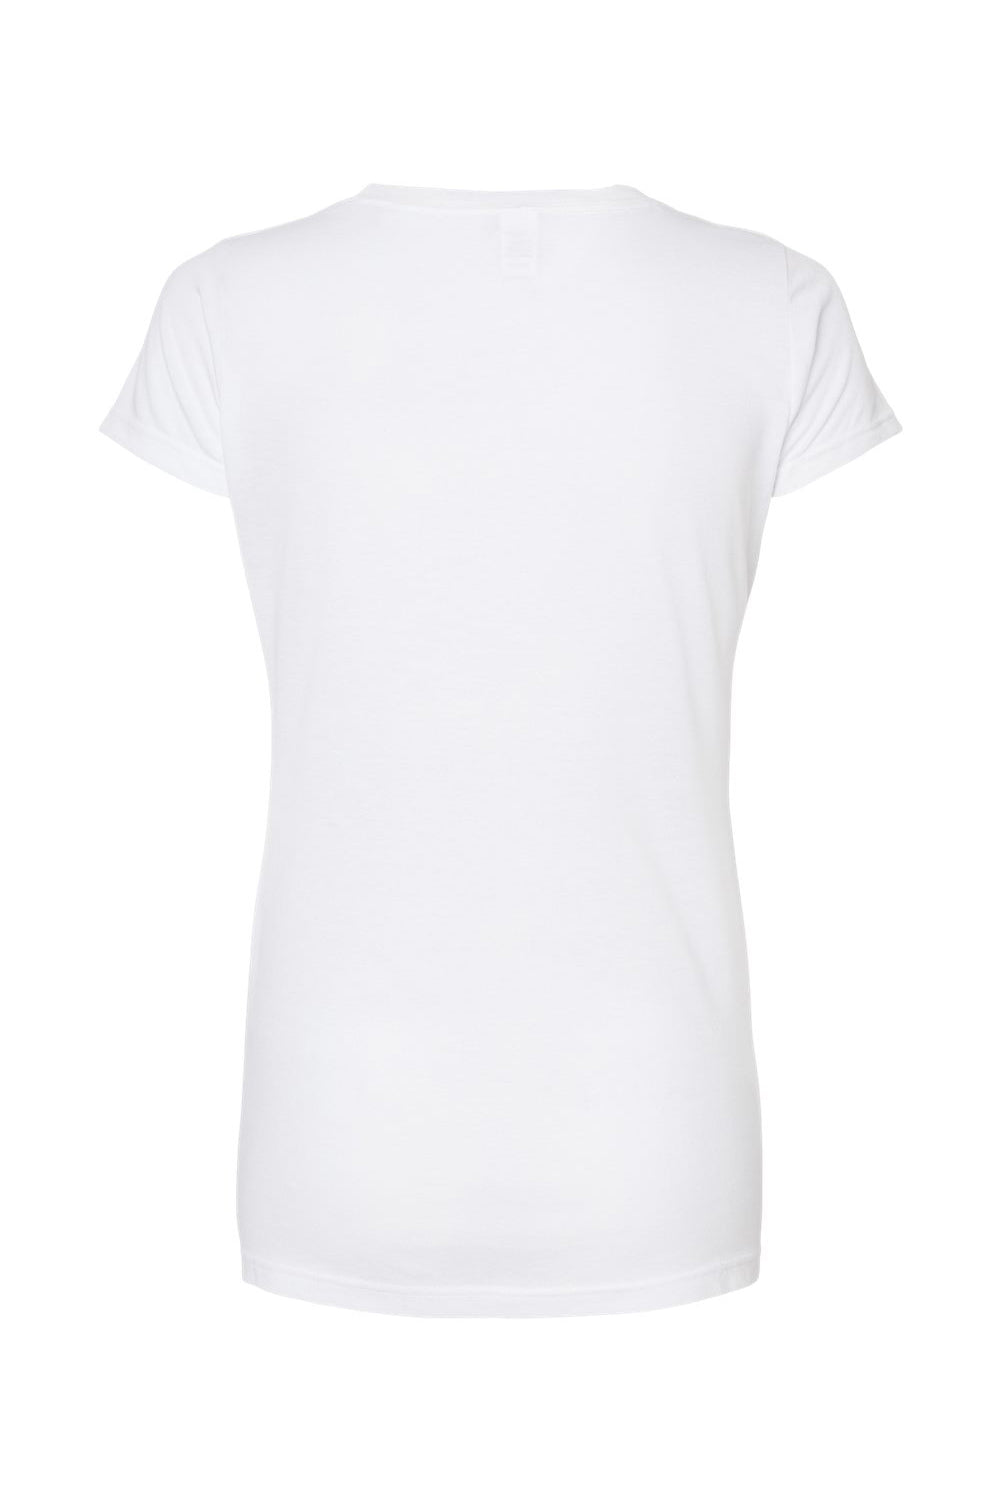 Tultex 243 Womens Poly-Rich Short Sleeve Scoop Neck T-Shirt White Flat Back